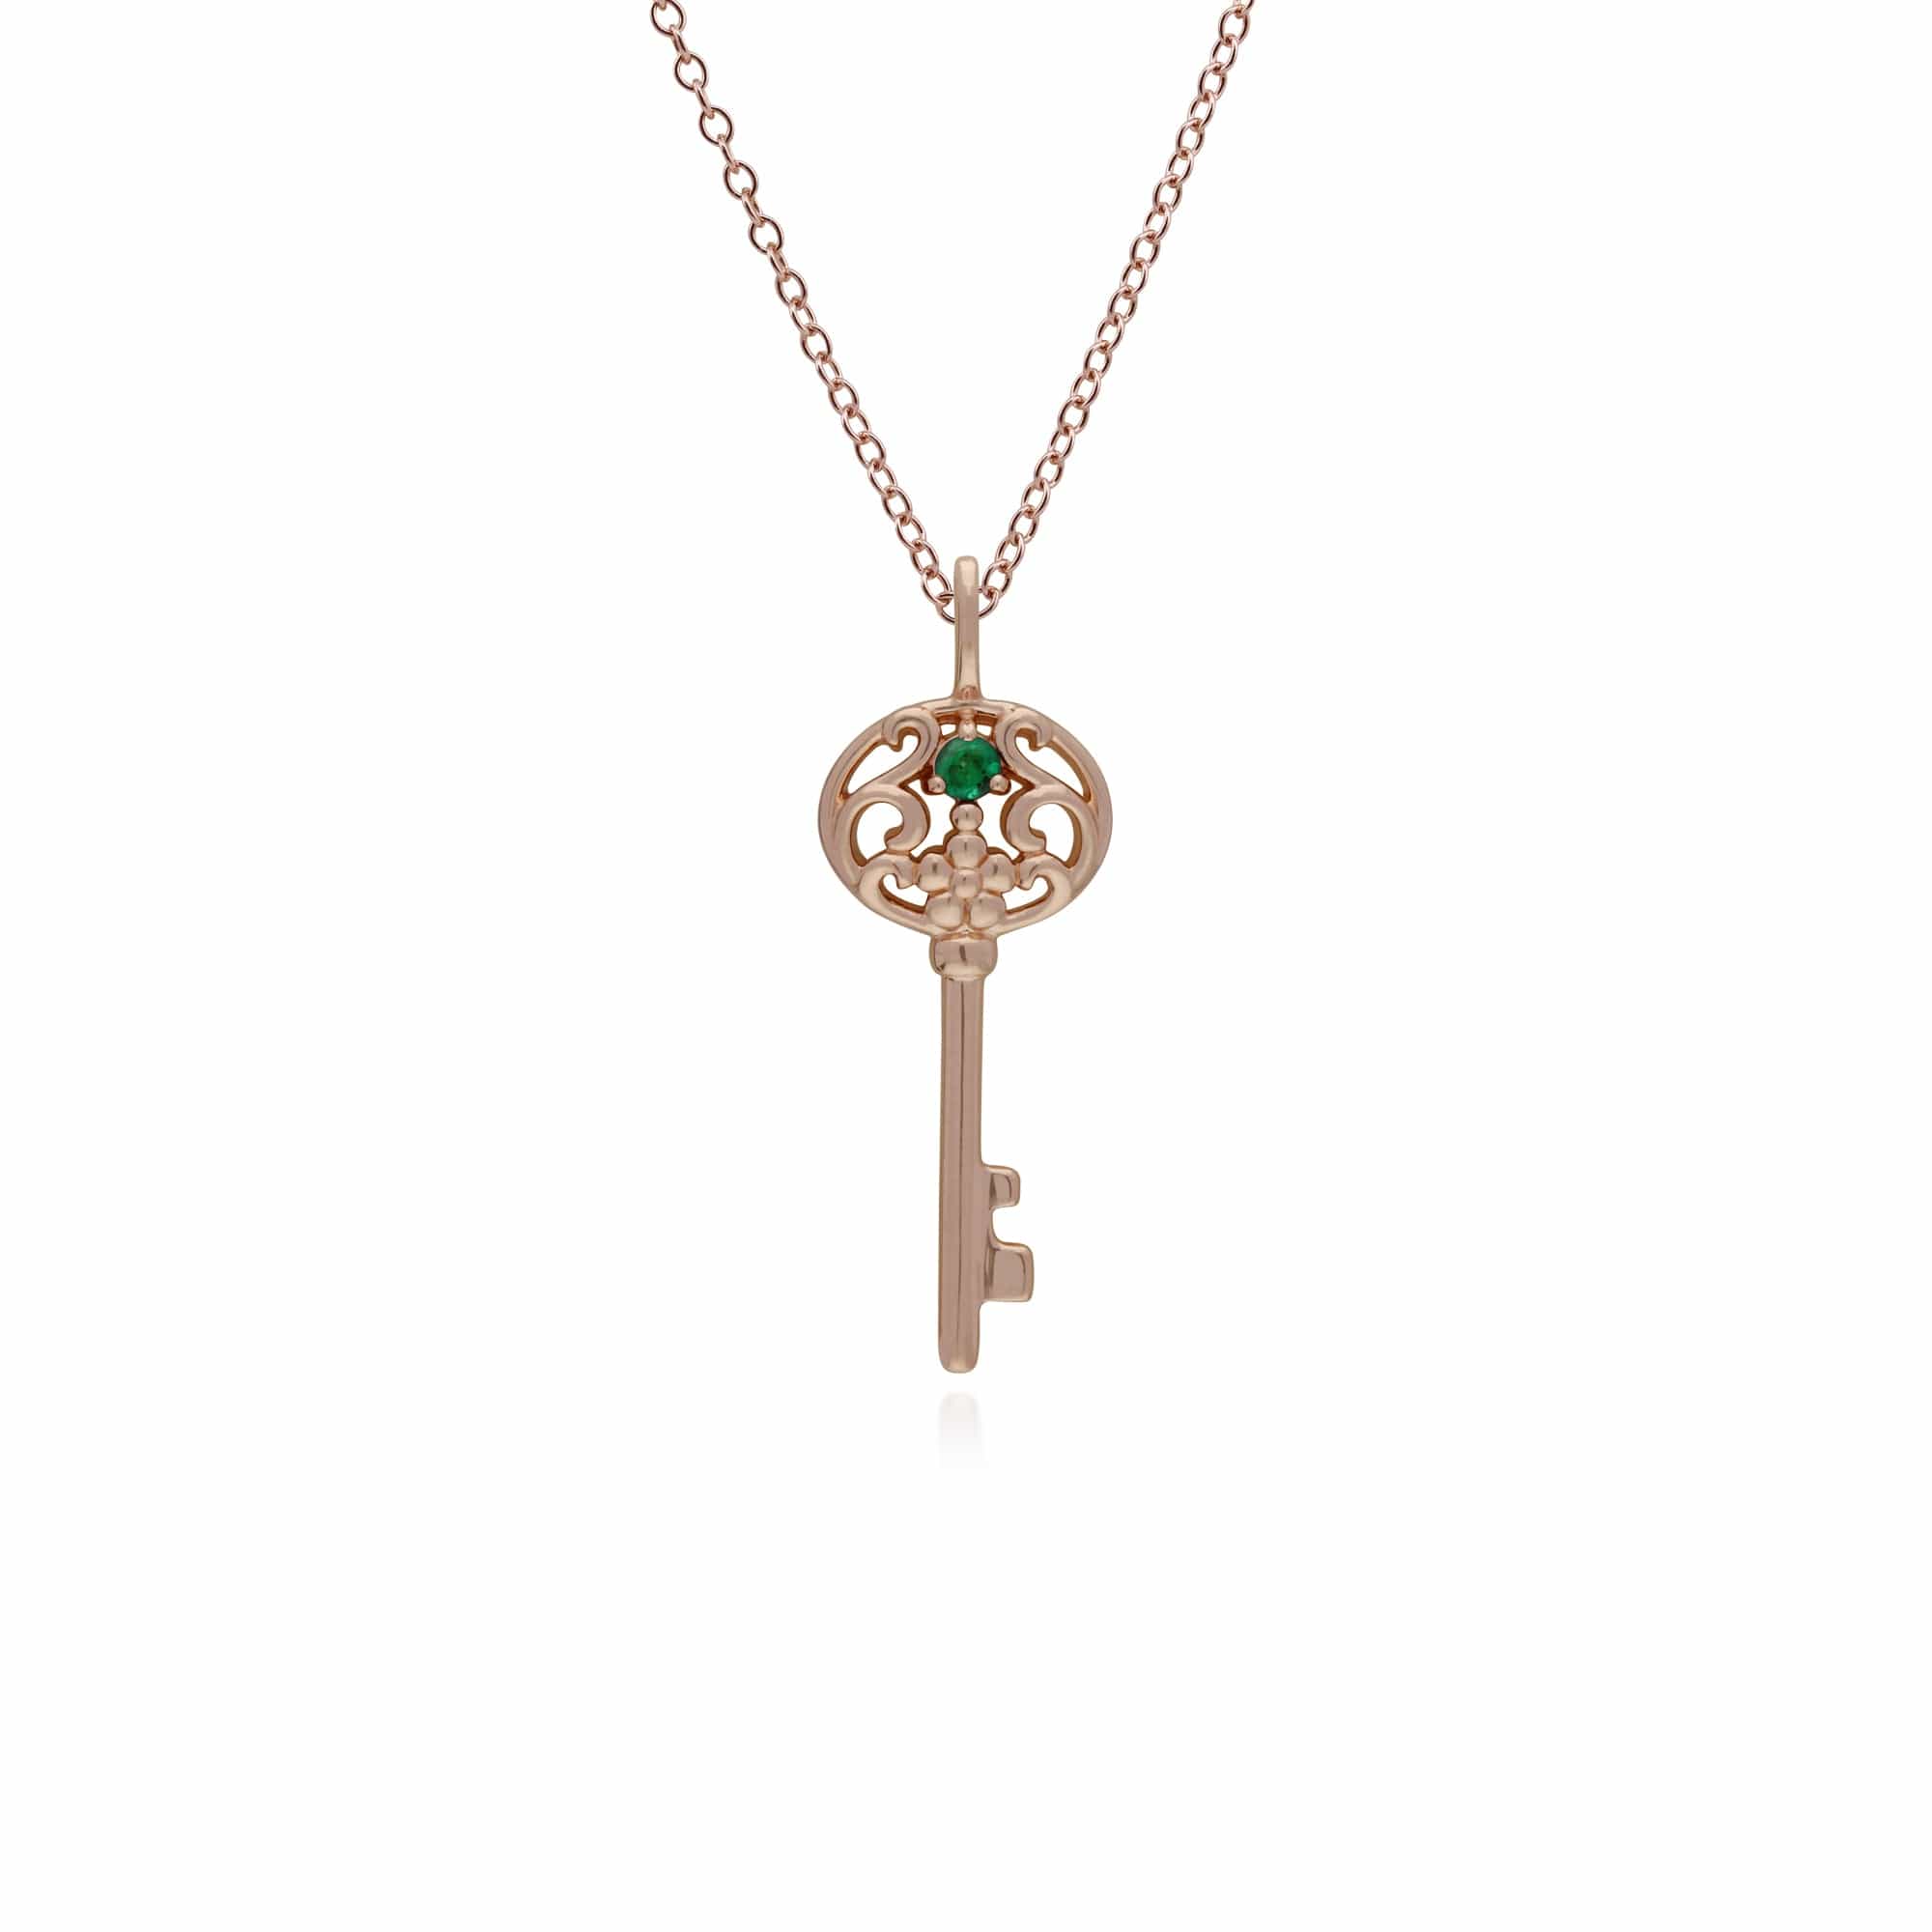 270P026704925-270P026901925 Classic Heart Lock Pendant & Emerald Big Key Charm in Rose Gold Plated 925 Sterling Silver 2